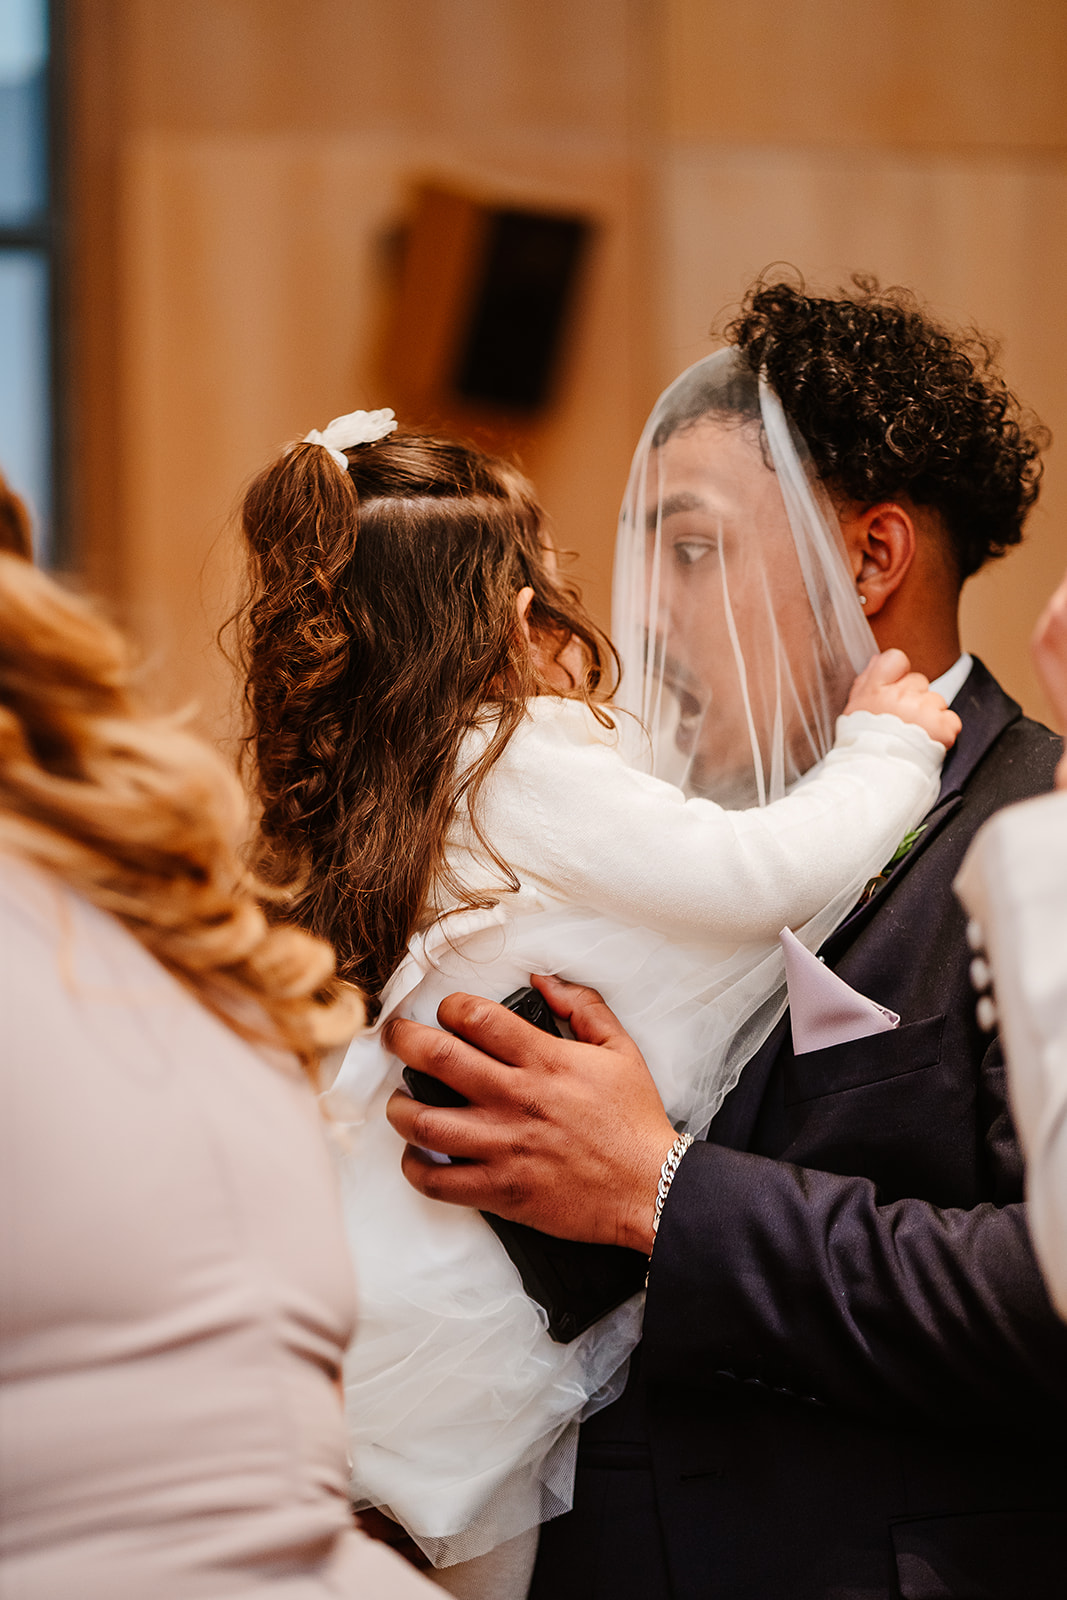 Child holding veil over face of a guest